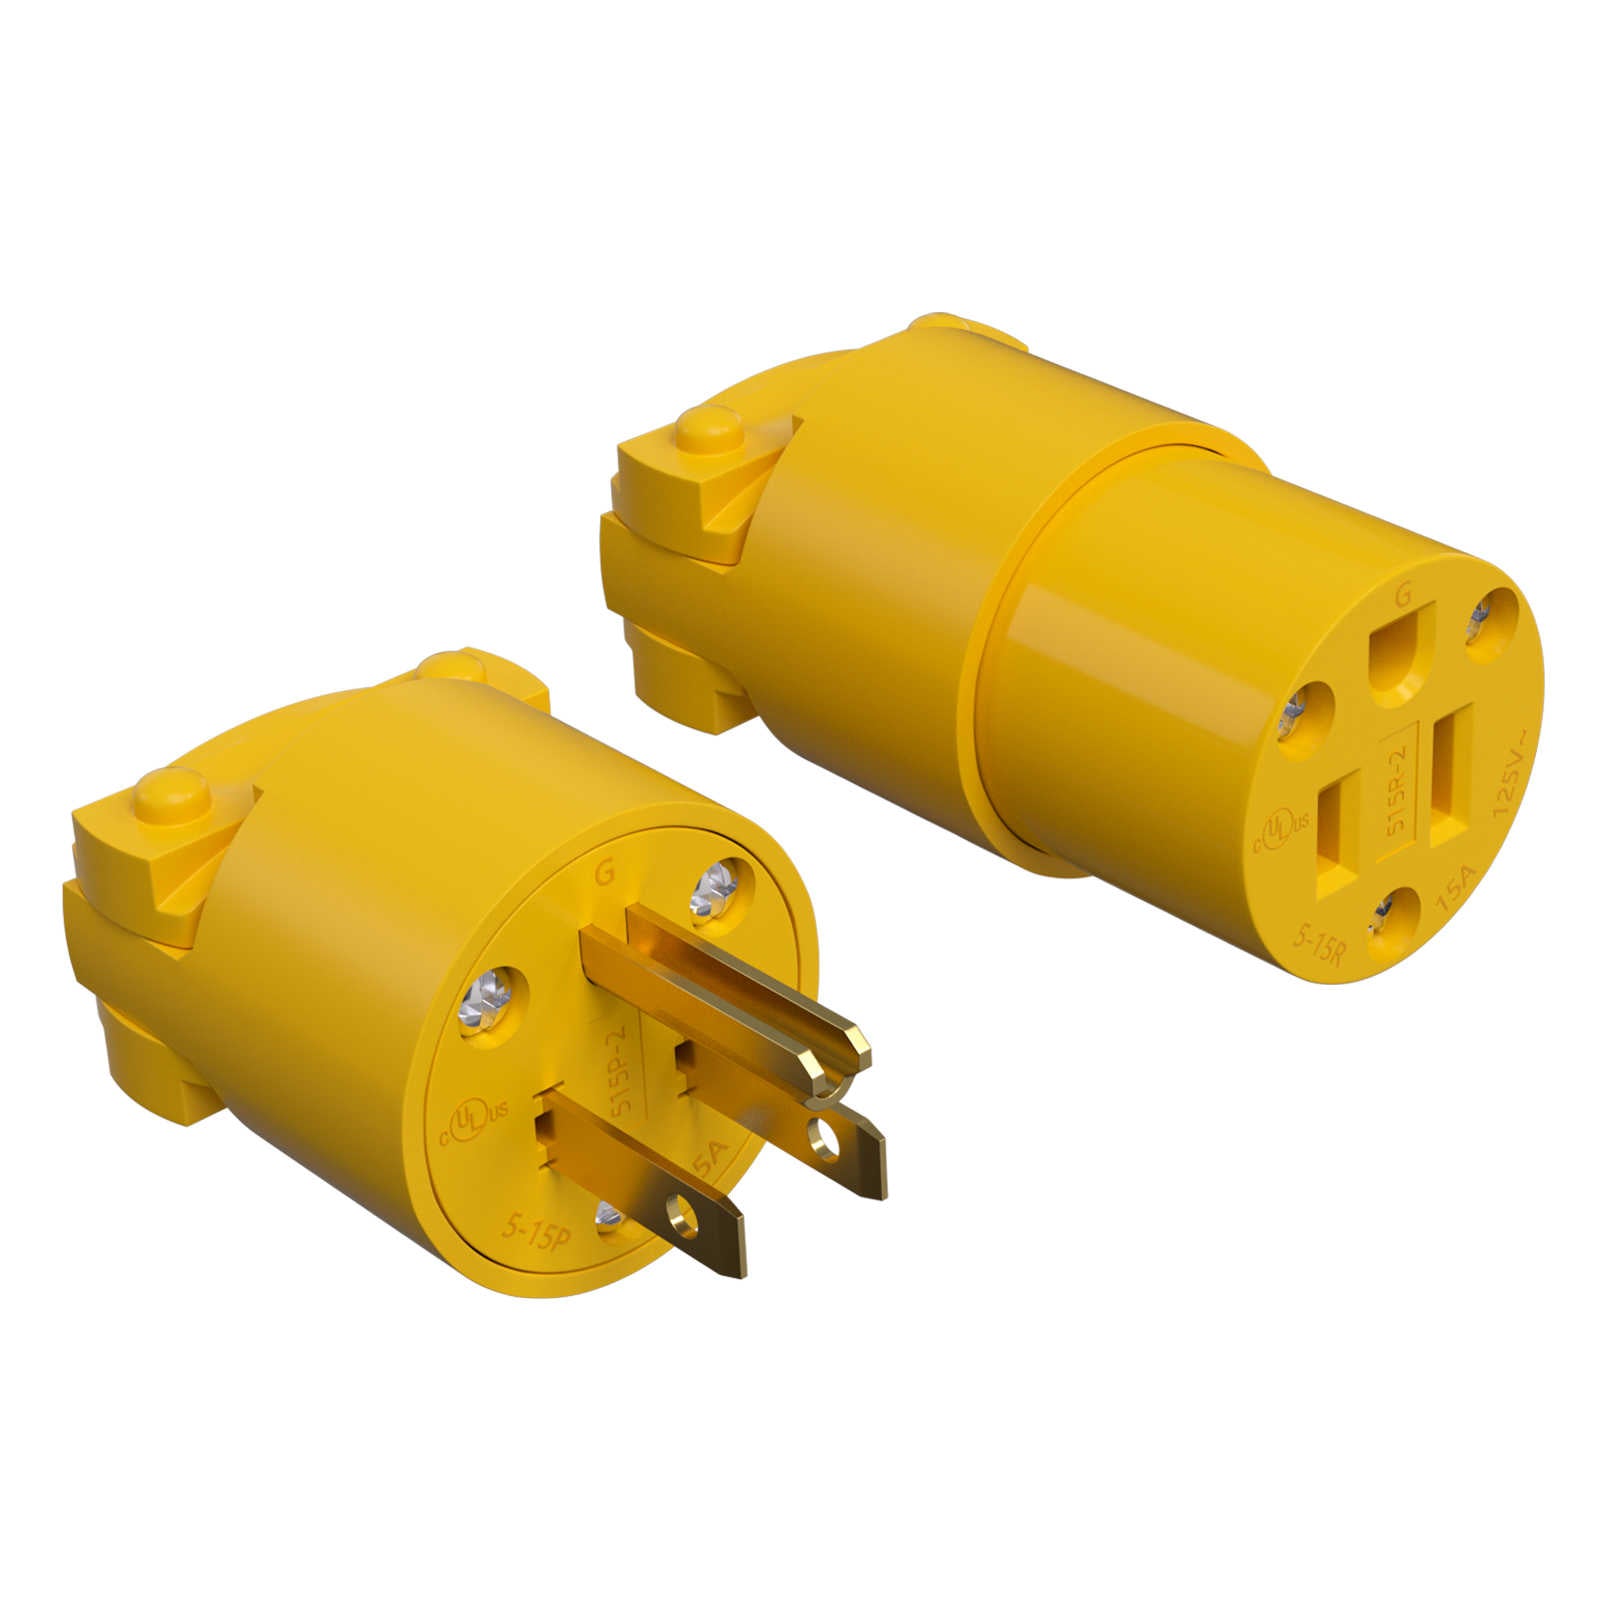 1 pcs electrical replacement Plug Connector Set Extension Cord Ends Yellow Shell